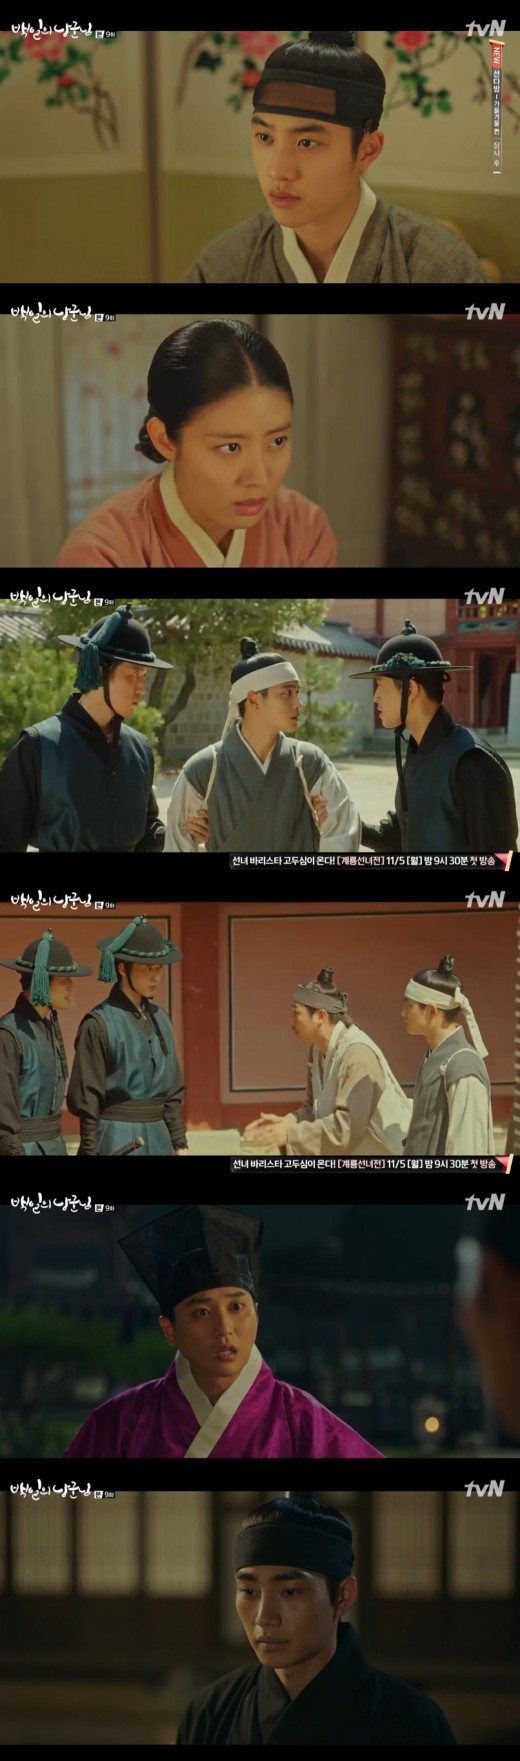 D.O. is back in the arms of Nam Ji-hyun.On TVNs Hundred Days of the Nang Gun, which aired on the 8th, a reunion kiss between Won Deuk (D.O.) and Nam Ji-hyun was drawn.While Won Deuk left for Hanyang to find memories, Jeyun (Kim Sun-ho) took over as a prestige. Jeyun was convinced that she was unmarried even in Hongsims claim that she was already married.When he realized that Hong-sim had become married late, he expressed his absurdity, saying, How in two months. He also resented the king who told him to capture the daughters and miners of Faldo for the harmony of Yin and Yang.In the meantime, Wondeuk was found to be a palace but was hit by a gate beat. Outside the palace, Wondeuk encountered Kim Cha-eon (Jo Sung-ha), but they passed without recognizing each other.Kim Cha-eon is in check with the heavy war, and it is expected to cause confusion by spreading rumors that the child of Sejabin Kim (Han So-hee) is not the blood of the royal family.The problem was not Kim Cha-eon, who had just witnessed Bae Suzy (Park Jung-min) being kicked out of the palace. Bae Suzy told the unleaded (Kim Jae-young) that he was sick of something.How can a person be so same?So the unleashed tracked the original gain. The reunion spread to struggle, and the original gain quickly prevailed.Wondeuk asked, Do you know who I am?On the other hand, Hong-sim felt upset by the unreturned resentment. Hong-sim swallowed his tears, saying, Why do I do this? Its a fake marriage, but its not a real marriage.But Won-deuk returned to the arms of Hong-sim. Won-deuk and Hong-sims reunion kiss raised questions about the development.Photo = tvN